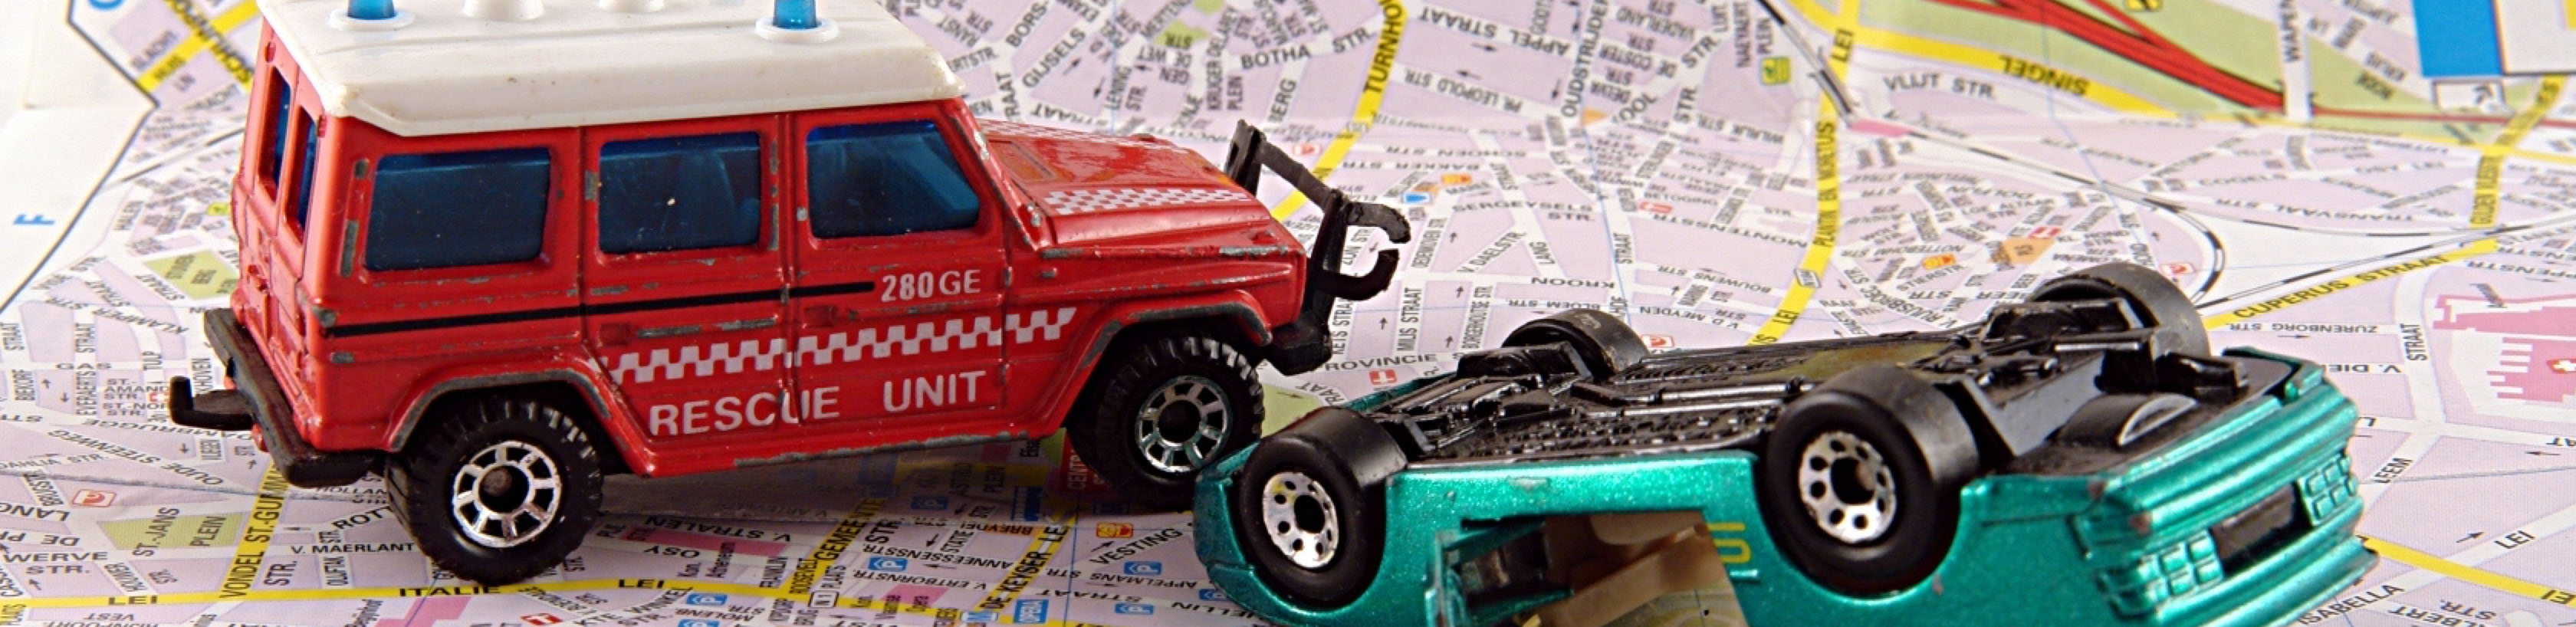 Toy cars on map